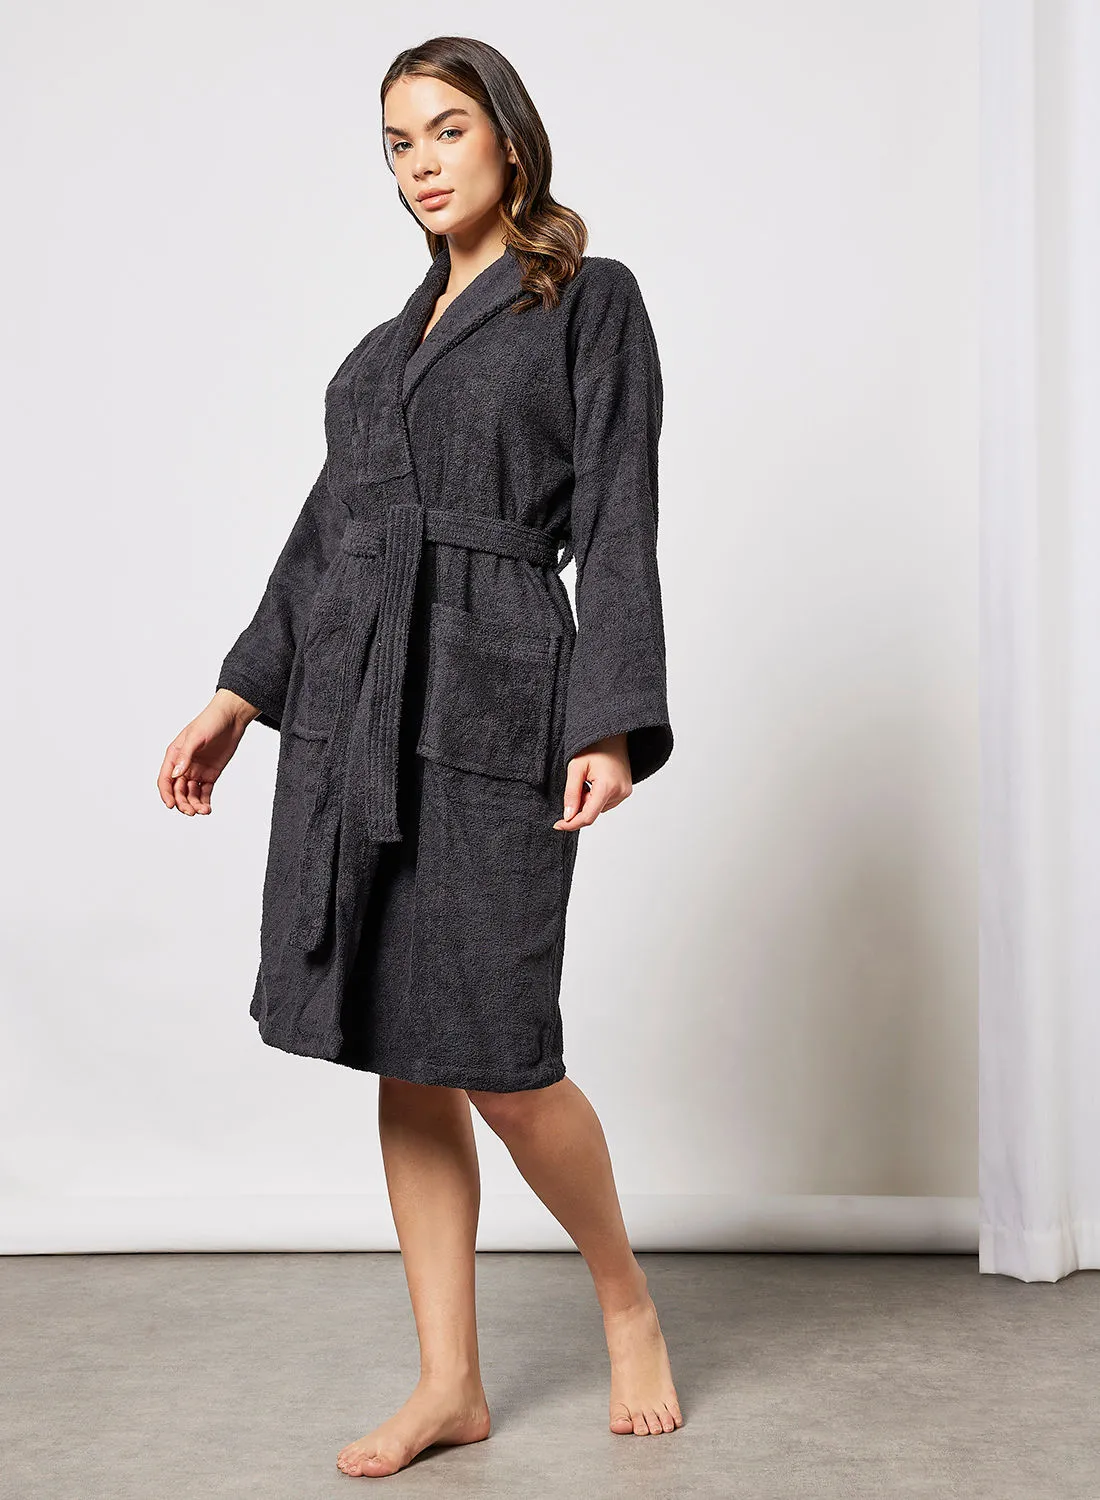 noon east Bathrobe - 400 GSM 100% Cotton Terry Silky Soft Spa Quality Comfort - Shawl Collar & Pocket - Black Color - 1 Piece